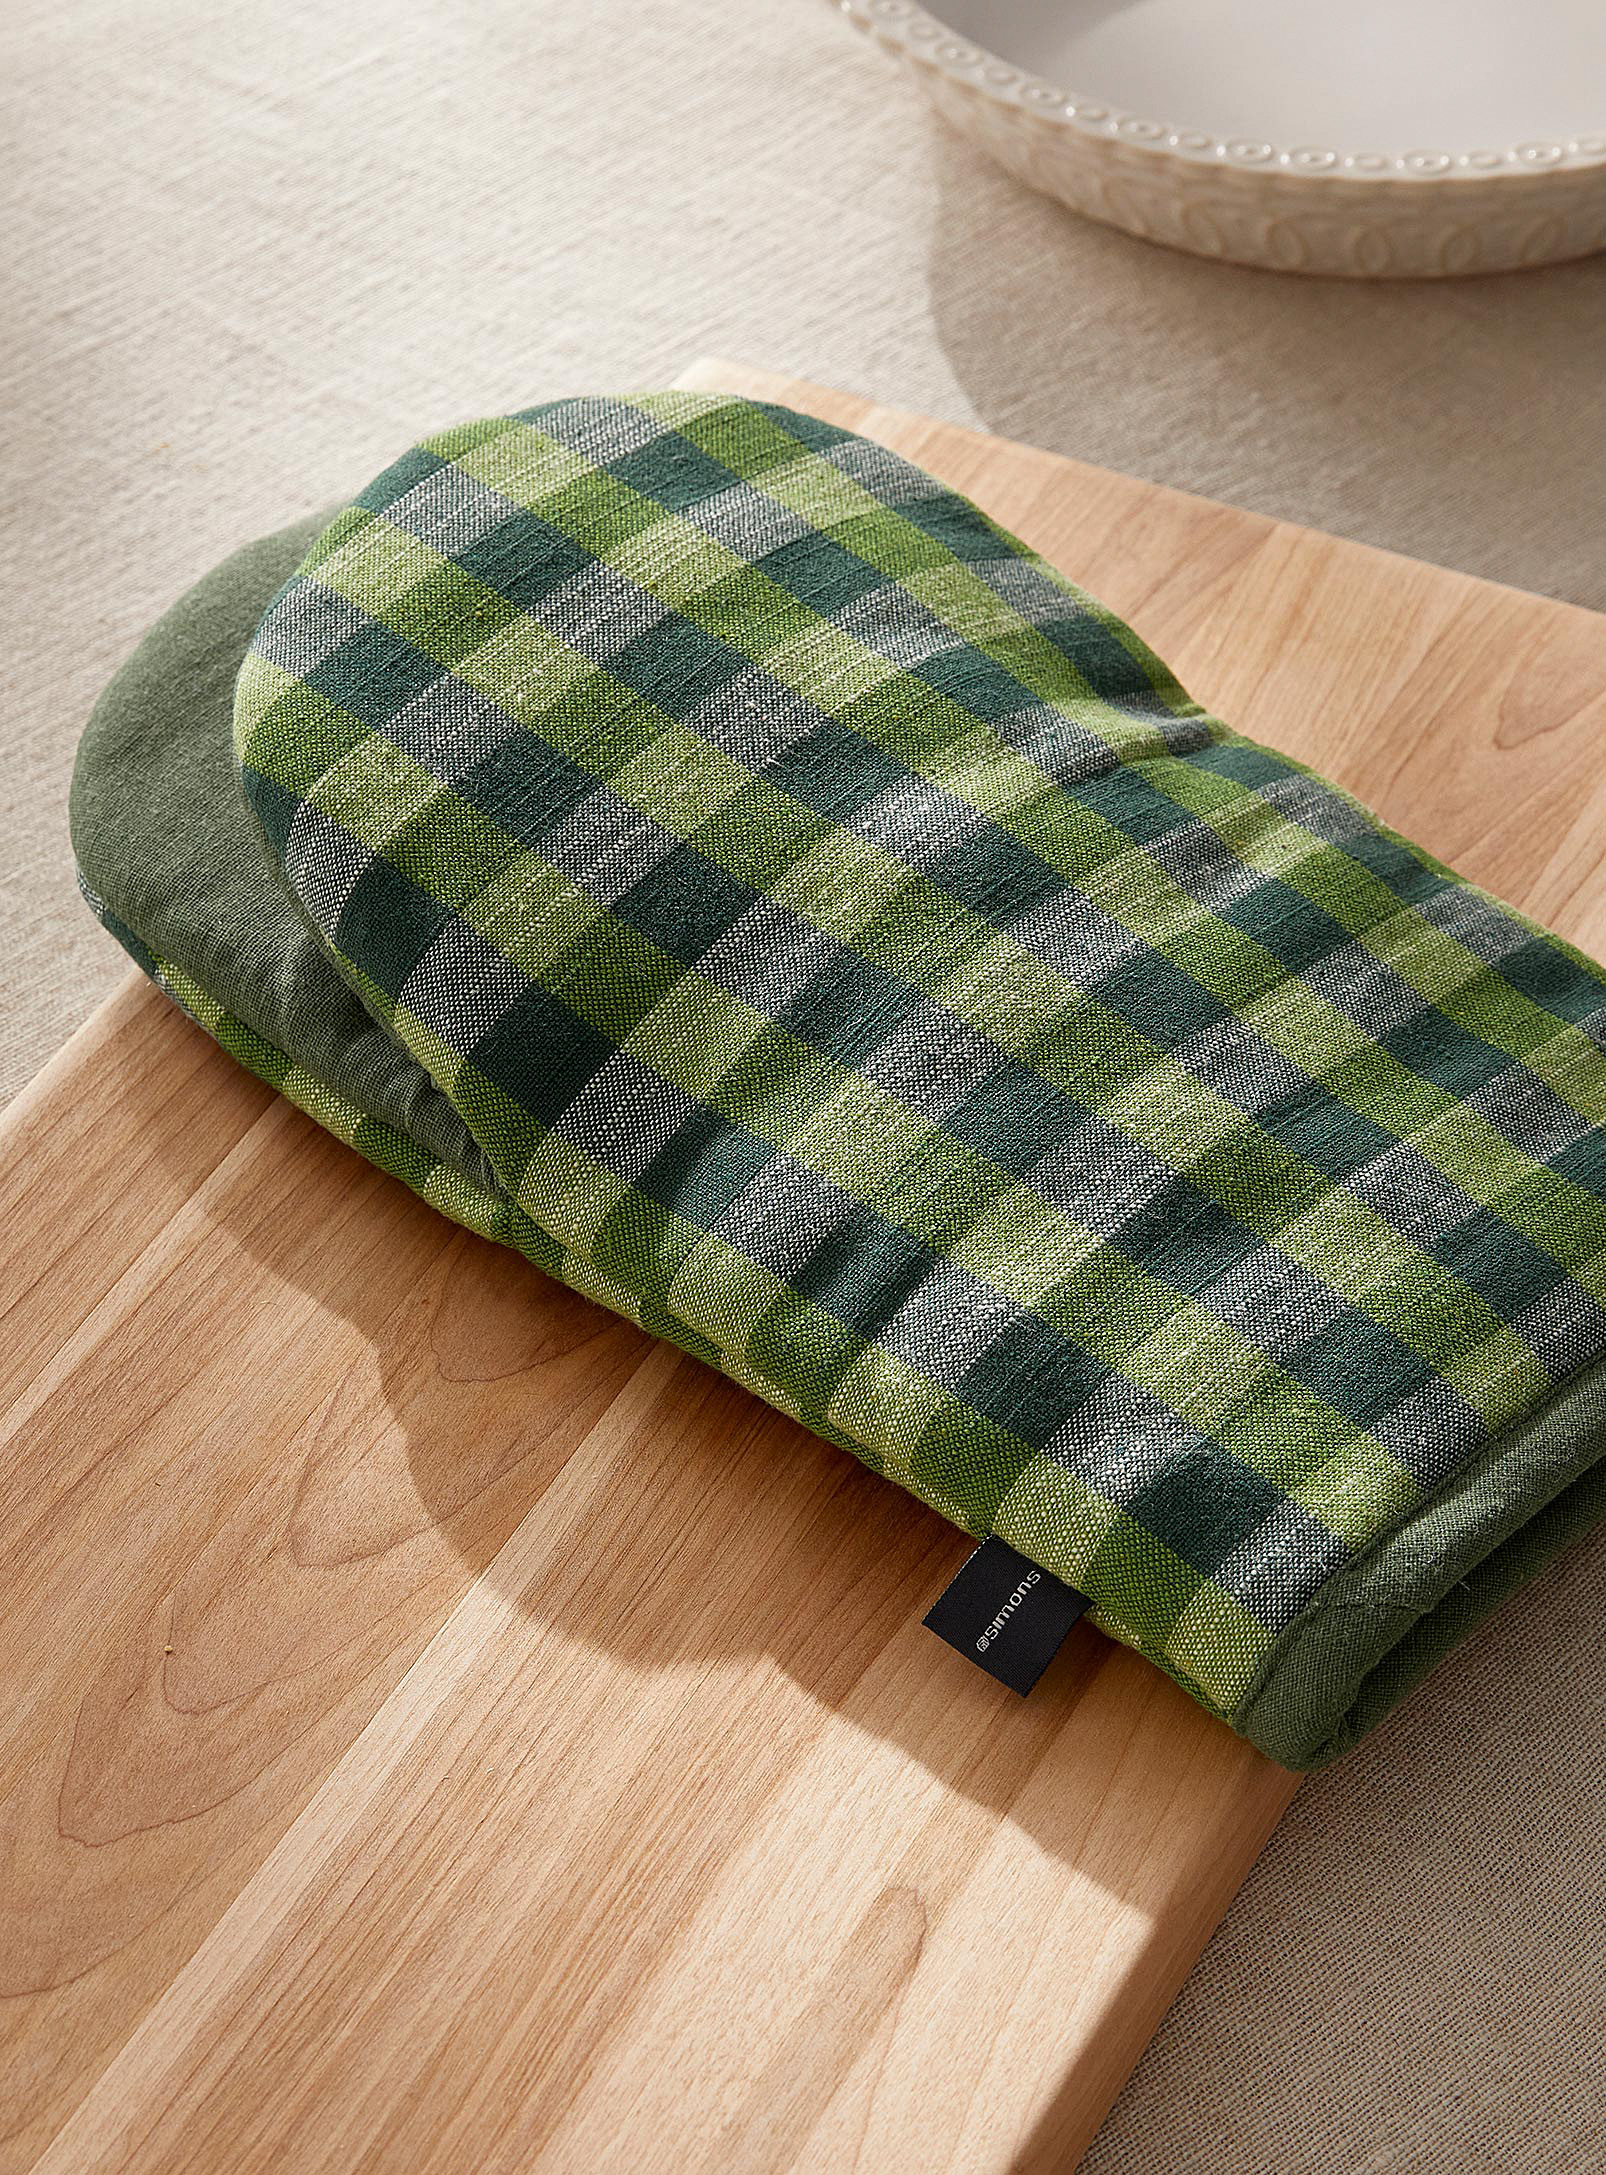 Simons Maison Gingham Checkers Recycled Fibre Oven Mitt In Green